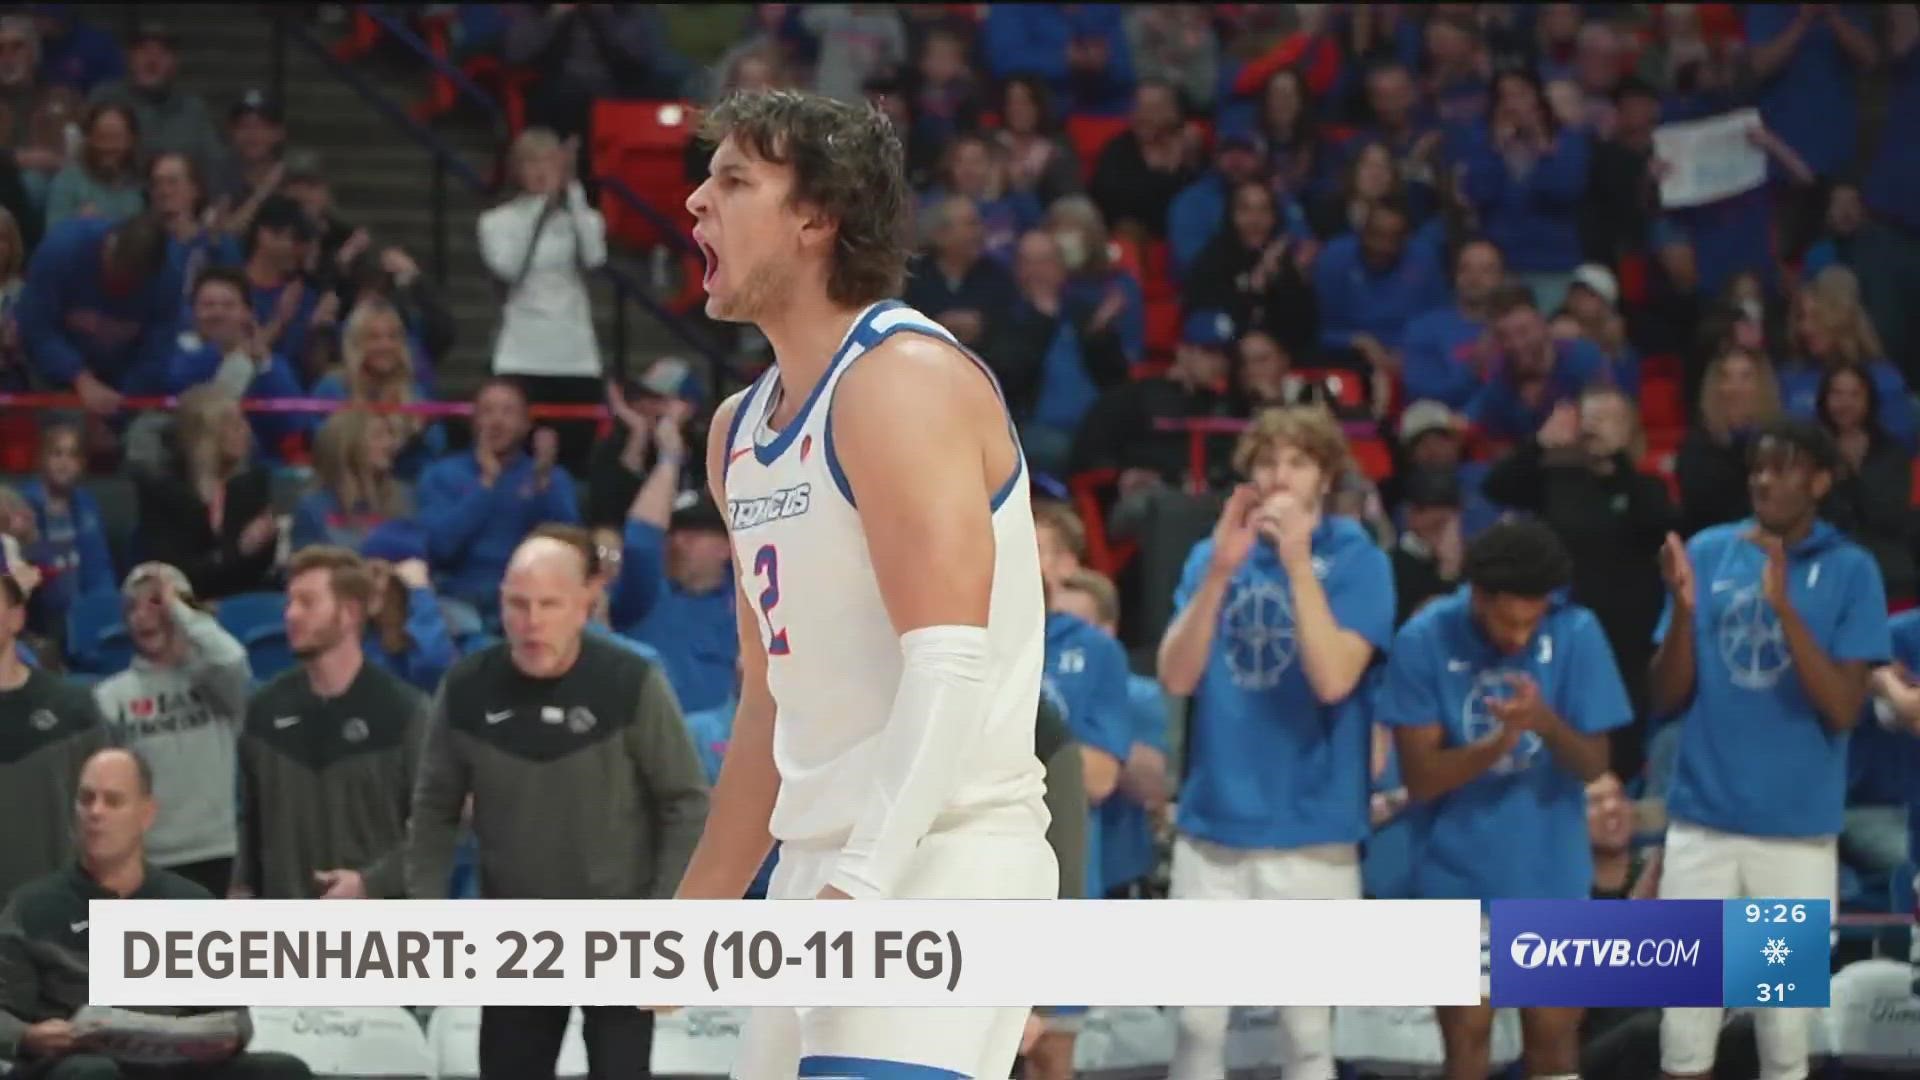 Sophomore forward Tyson Degenhart scored 22 points as Boise State men's basketball beat Colorado State 80-59 on Saturday night in ExtraMile Arena.